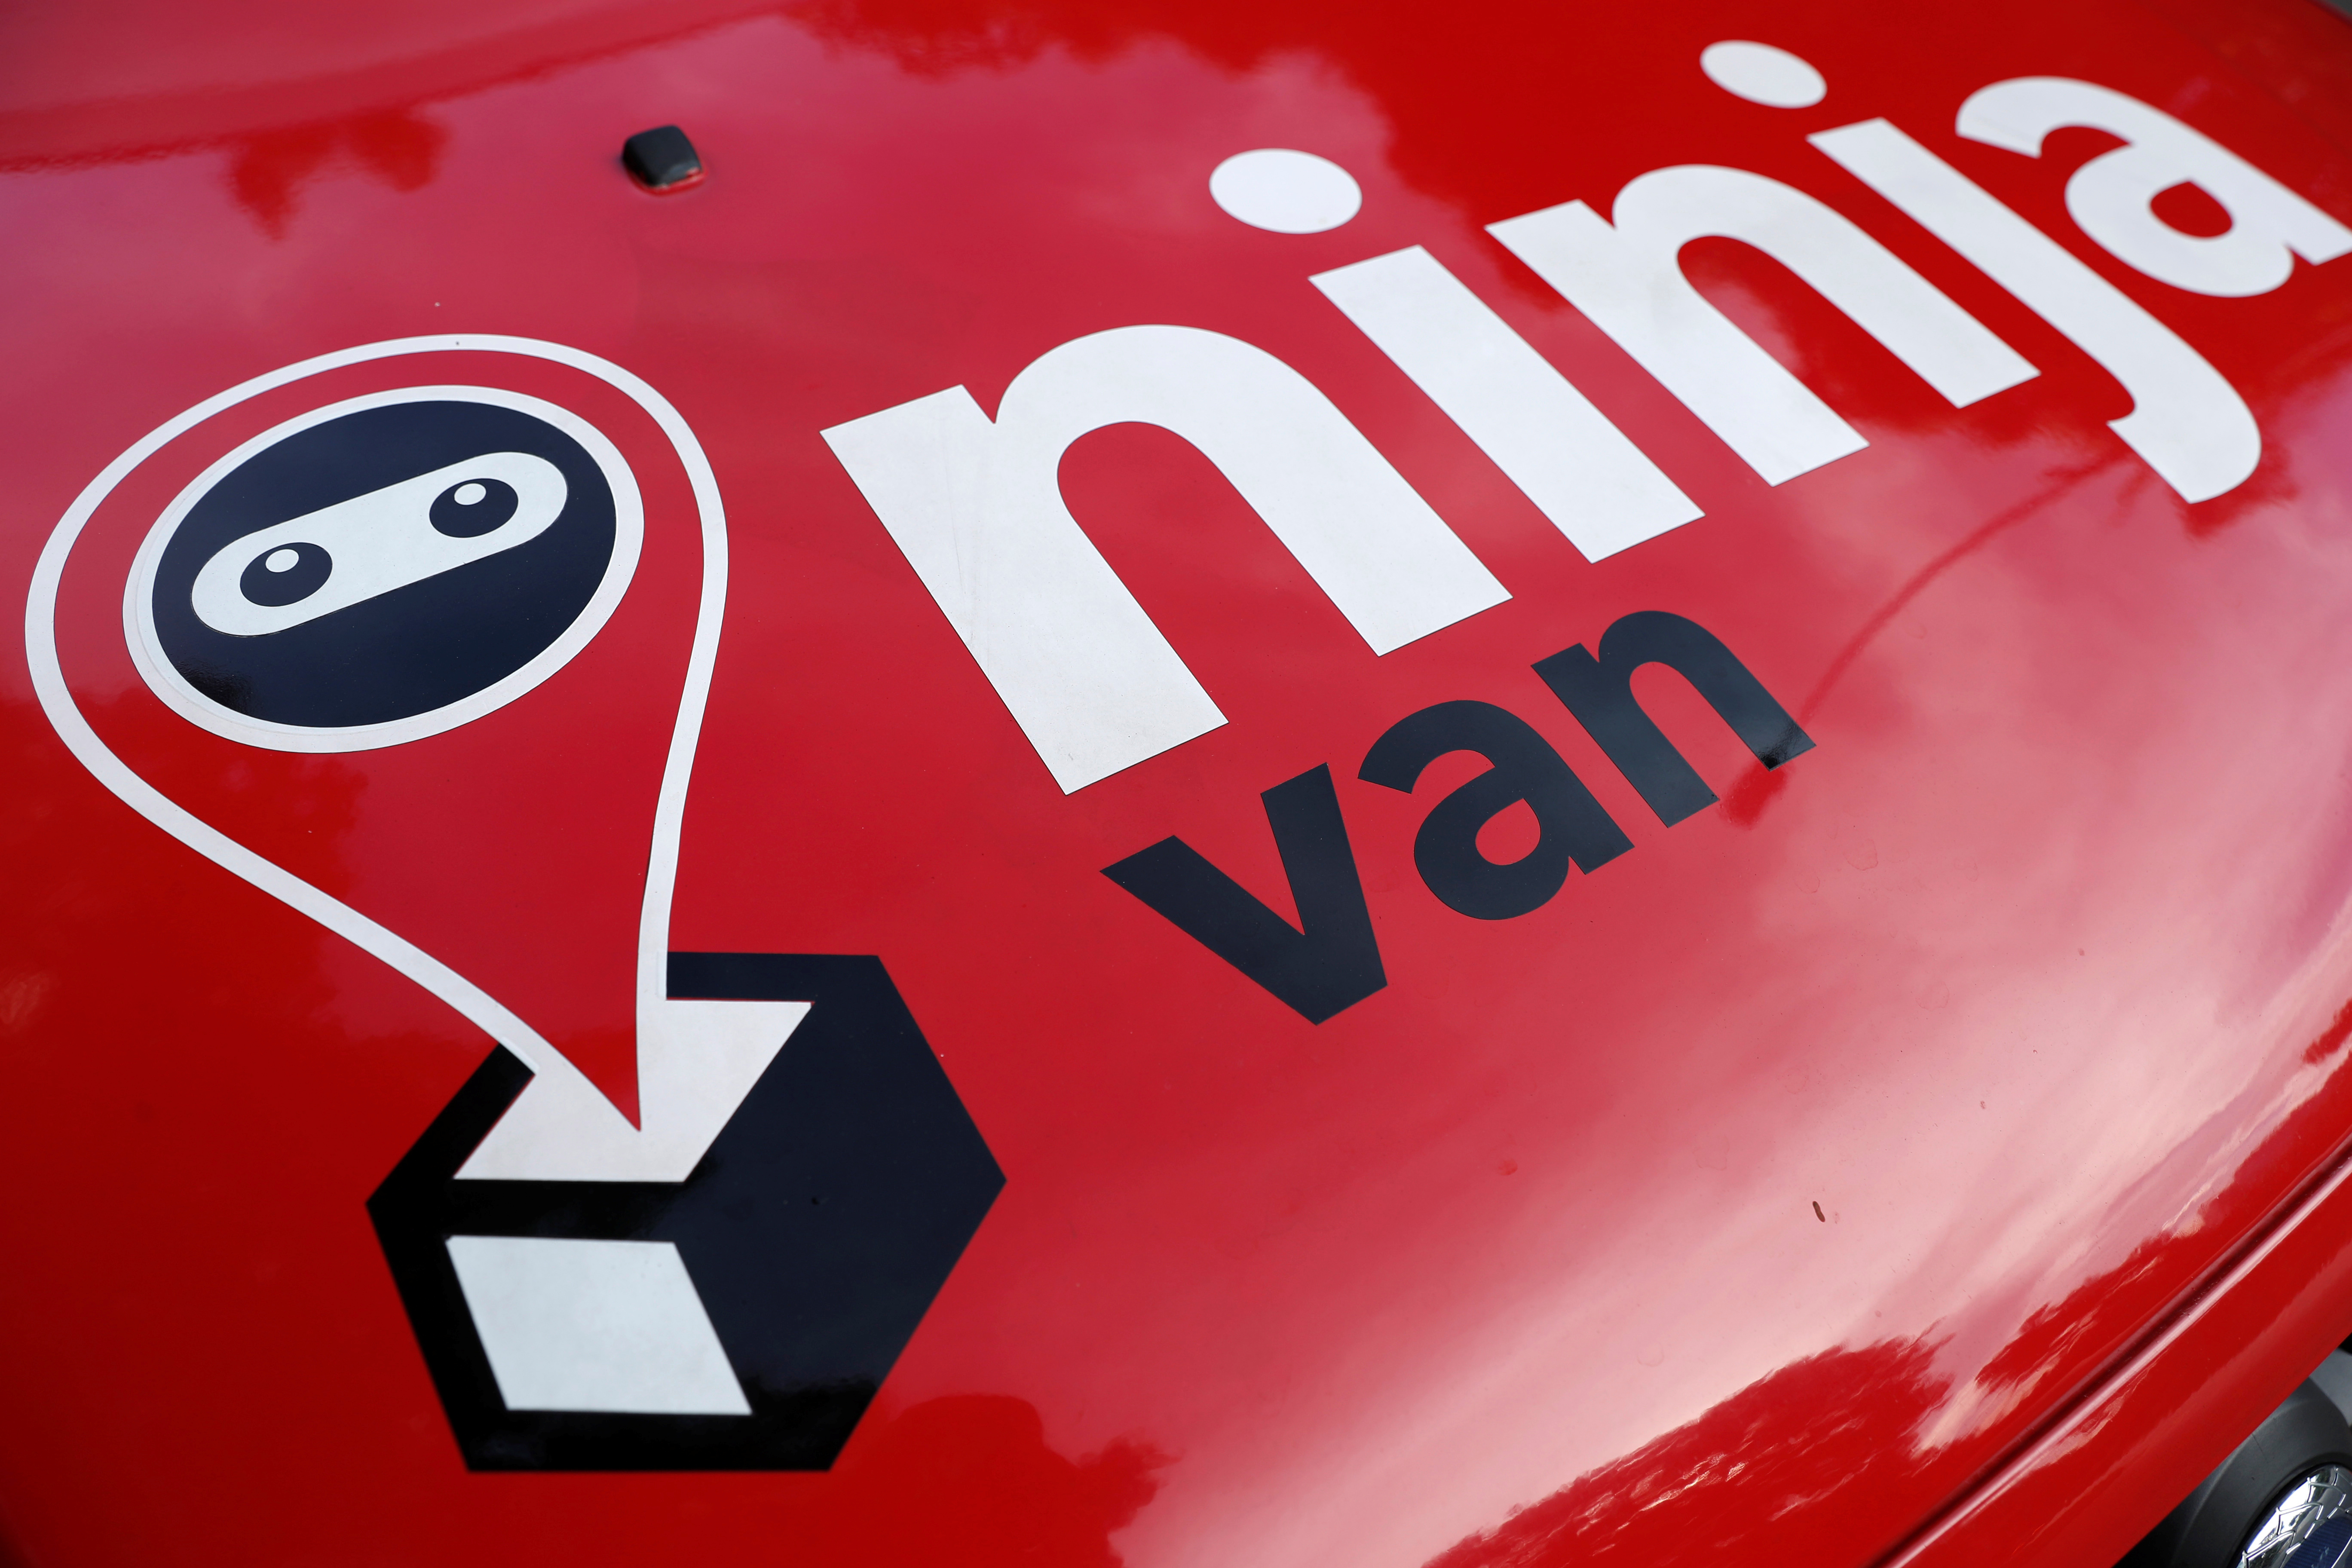 A Ninja Van delivery van is pictured at their office in Singapore